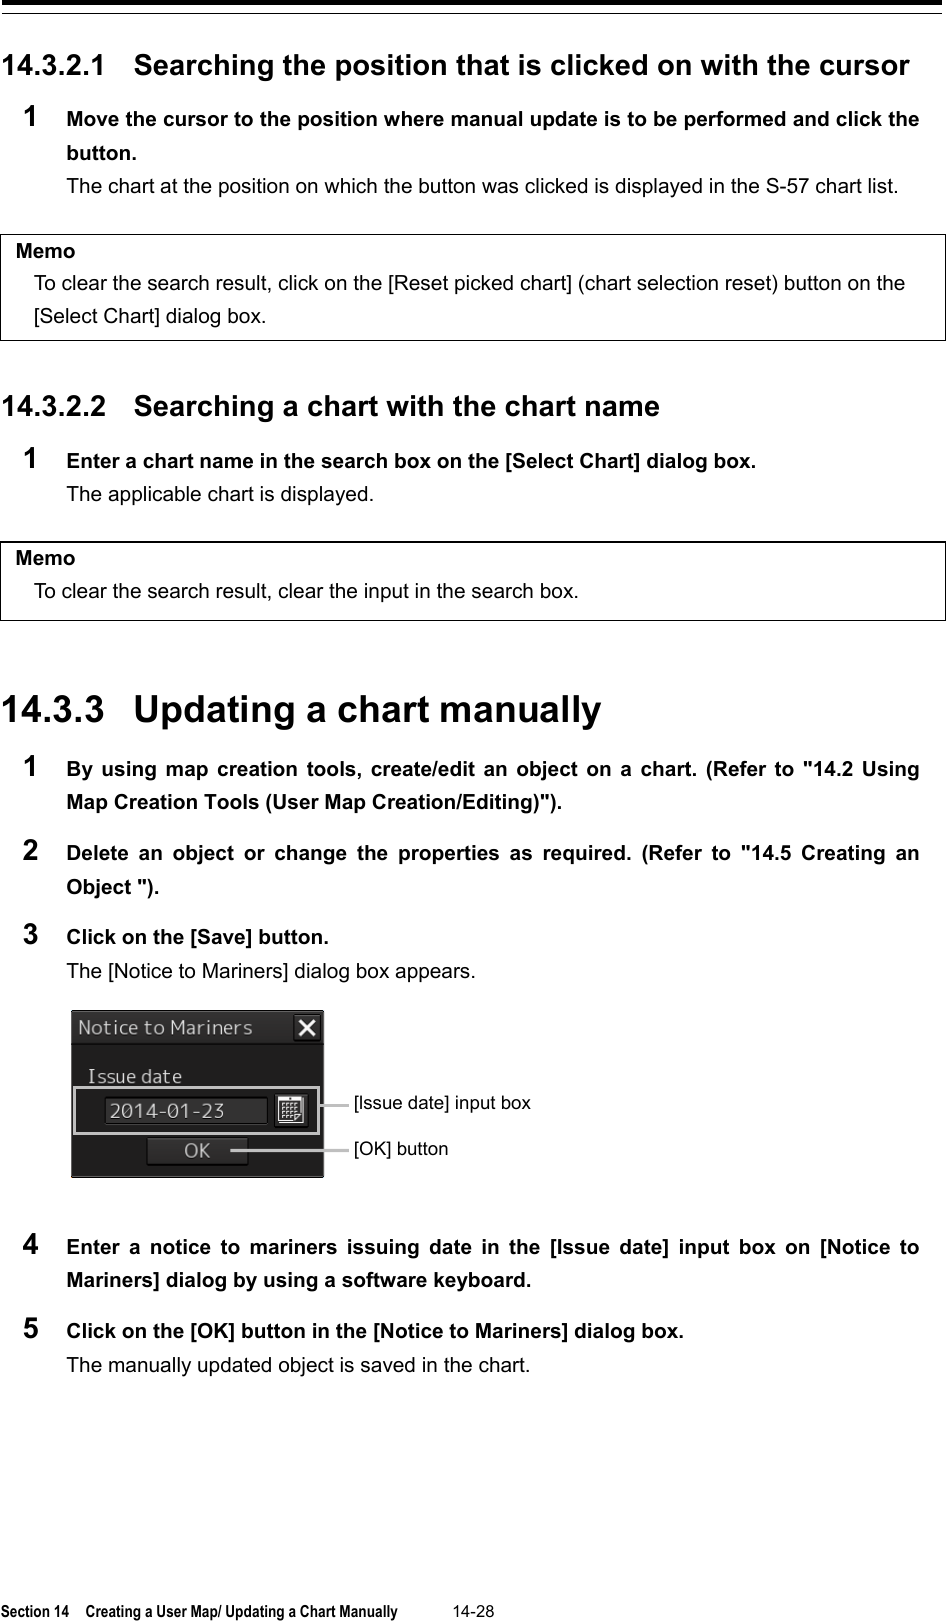  Section 14  Creating a User Map/ Updating a Chart Manually 14-28  14.3.2.1 Searching the position that is clicked on with the cursor 1  Move the cursor to the position where manual update is to be performed and click the button. The chart at the position on which the button was clicked is displayed in the S-57 chart list.  Memo To clear the search result, click on the [Reset picked chart] (chart selection reset) button on the [Select Chart] dialog box.   14.3.2.2 Searching a chart with the chart name 1  Enter a chart name in the search box on the [Select Chart] dialog box. The applicable chart is displayed.  Memo To clear the search result, clear the input in the search box.   14.3.3 Updating a chart manually 1  By using map creation tools, create/edit an object on a chart. (Refer to &quot;14.2 Using Map Creation Tools (User Map Creation/Editing)&quot;). 2  Delete an object or change the properties as required. (Refer to &quot;14.5  Creating an Object &quot;). 3  Click on the [Save] button. The [Notice to Mariners] dialog box appears.  4  Enter a notice to mariners issuing date in the [Issue date] input box on [Notice to Mariners] dialog by using a software keyboard. 5  Click on the [OK] button in the [Notice to Mariners] dialog box. The manually updated object is saved in the chart.   [lssue date] input box [OK] button 